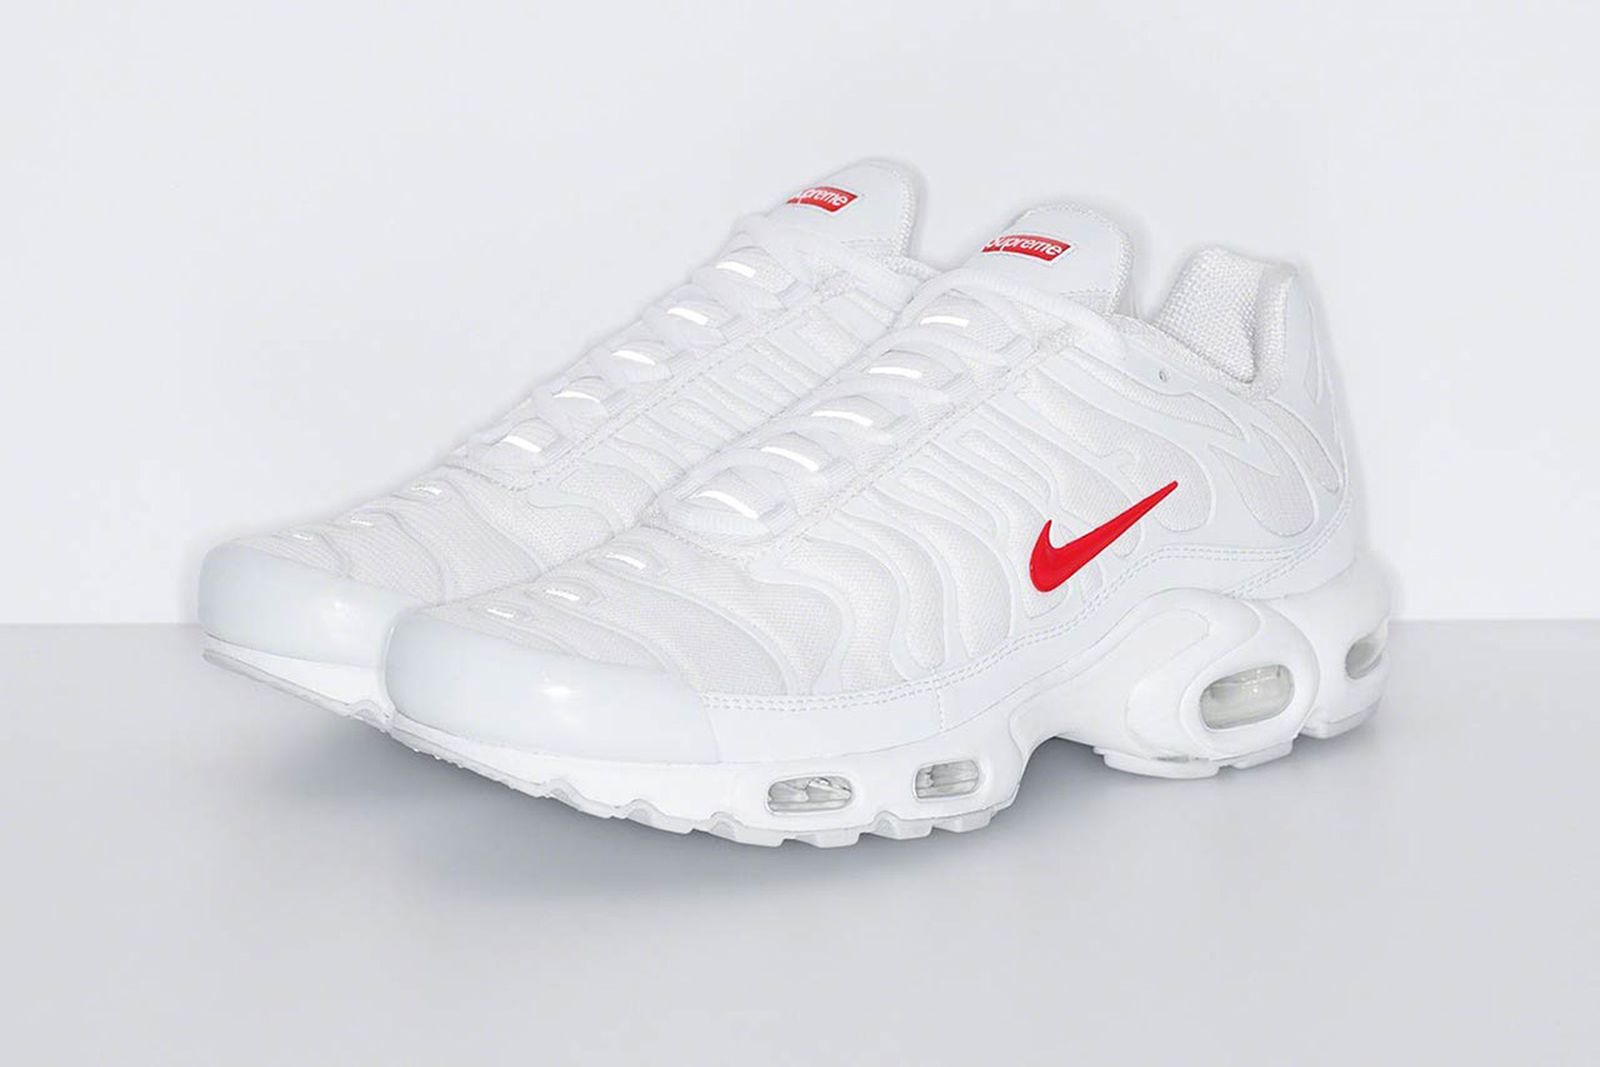 The All-White Supreme x Nike Air Max Plus Is Dropping Today